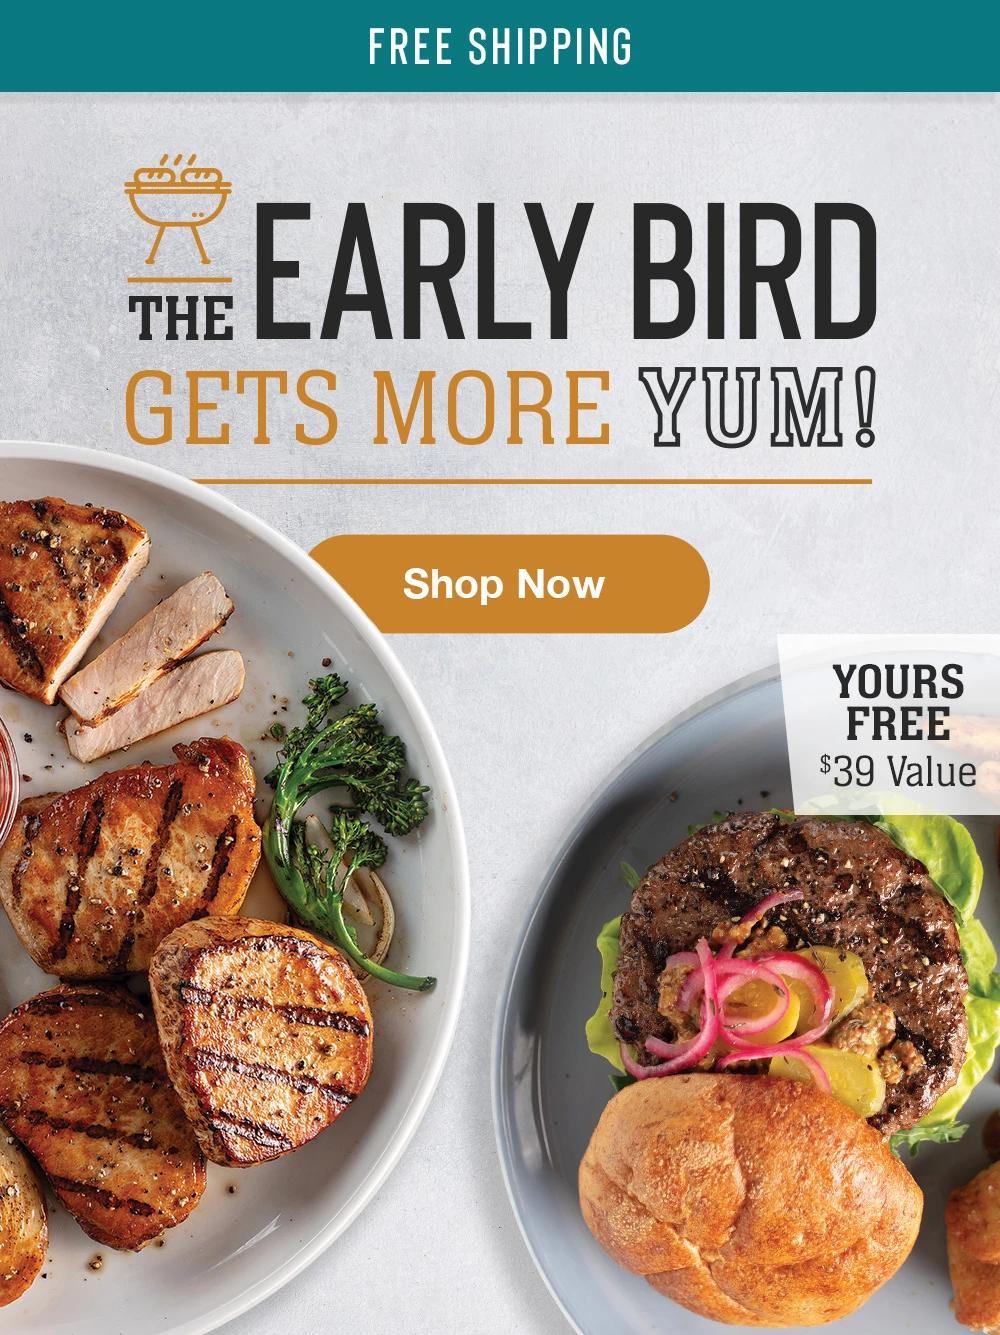 FREE SHIPPING | THE EARLY BIRD GETS MORE YUM! || Shop Now || YOURS FREE - $39 Value